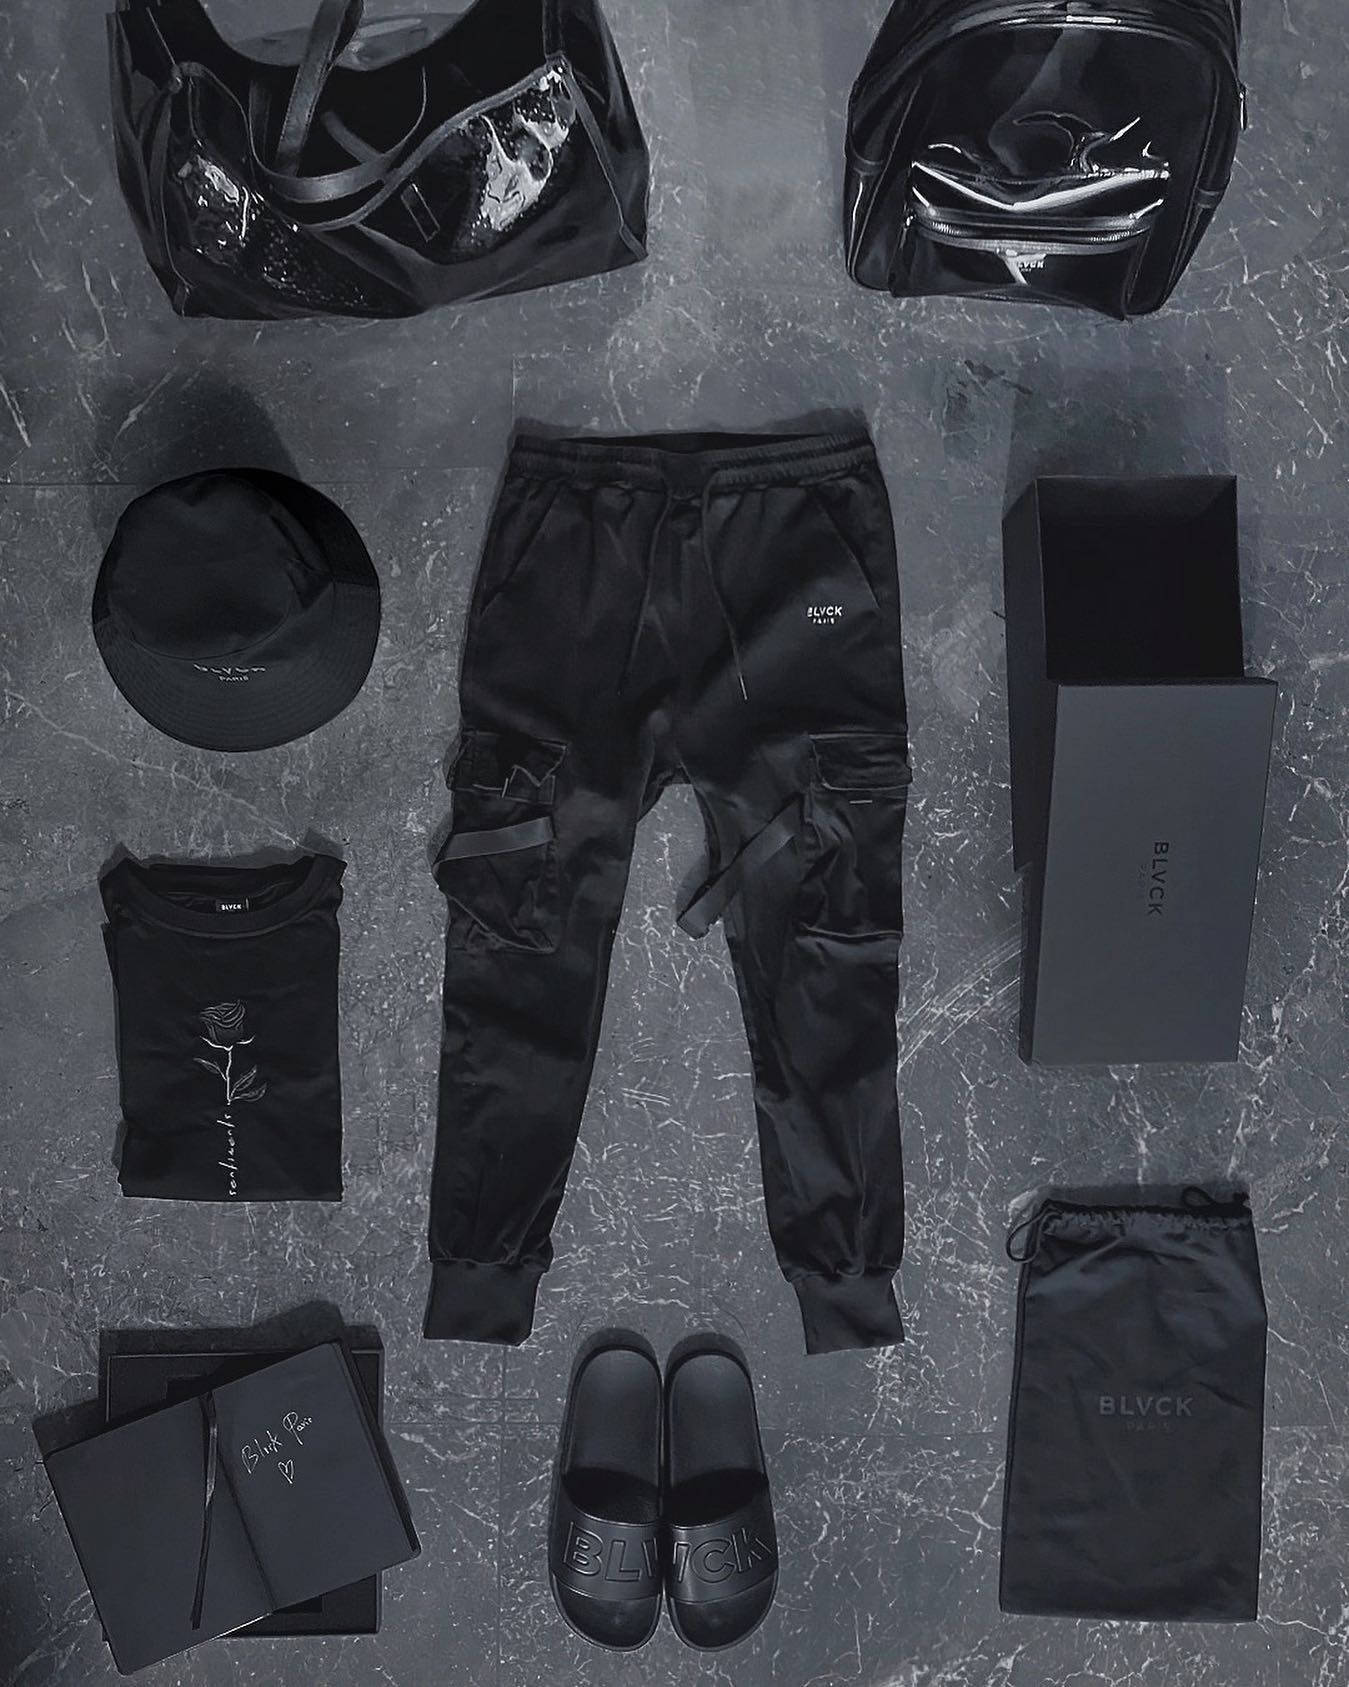 Blvckparis Outfit Flatlay Can Be Translated To Spanish As 